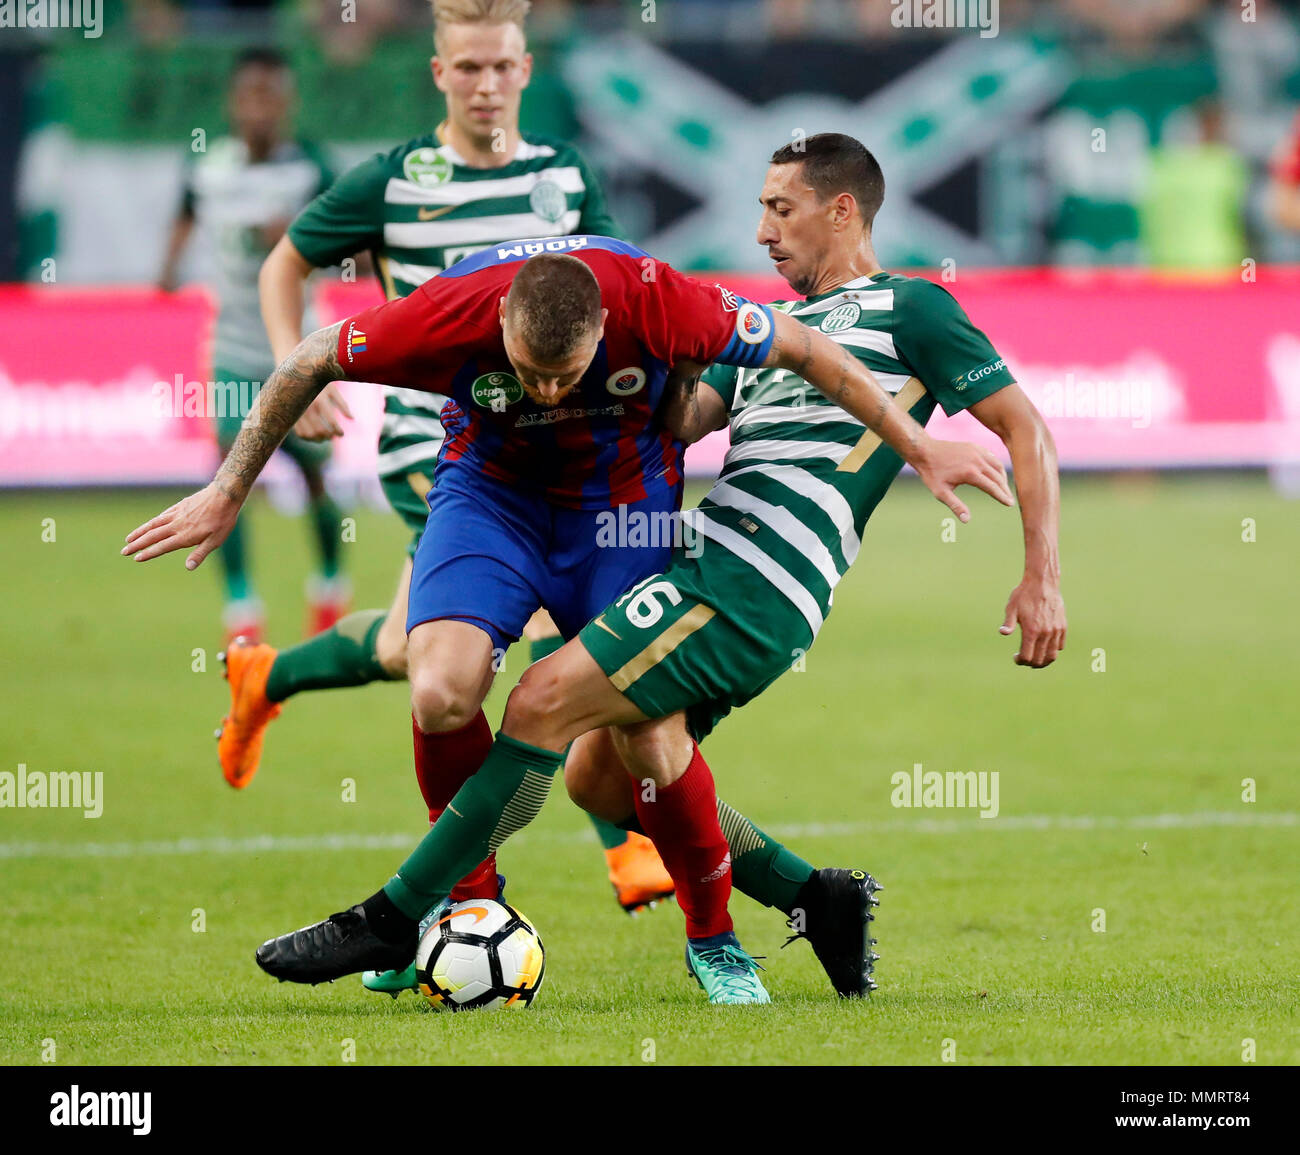 BUDAPEST, HUNGARY - MAY 12: (r-l) Leandro De Almeida 'Leo' of Ferencvarosi TC tackles Martin Adam of Vasas FC in front of Janek Sternberg of Ferencvarosi TC during the Hungarian OTP Bank Liga match between Ferencvarosi TC and Vasas FC at Groupama Arena on May 12, 2018 in Budapest, Hungary. Stock Photo